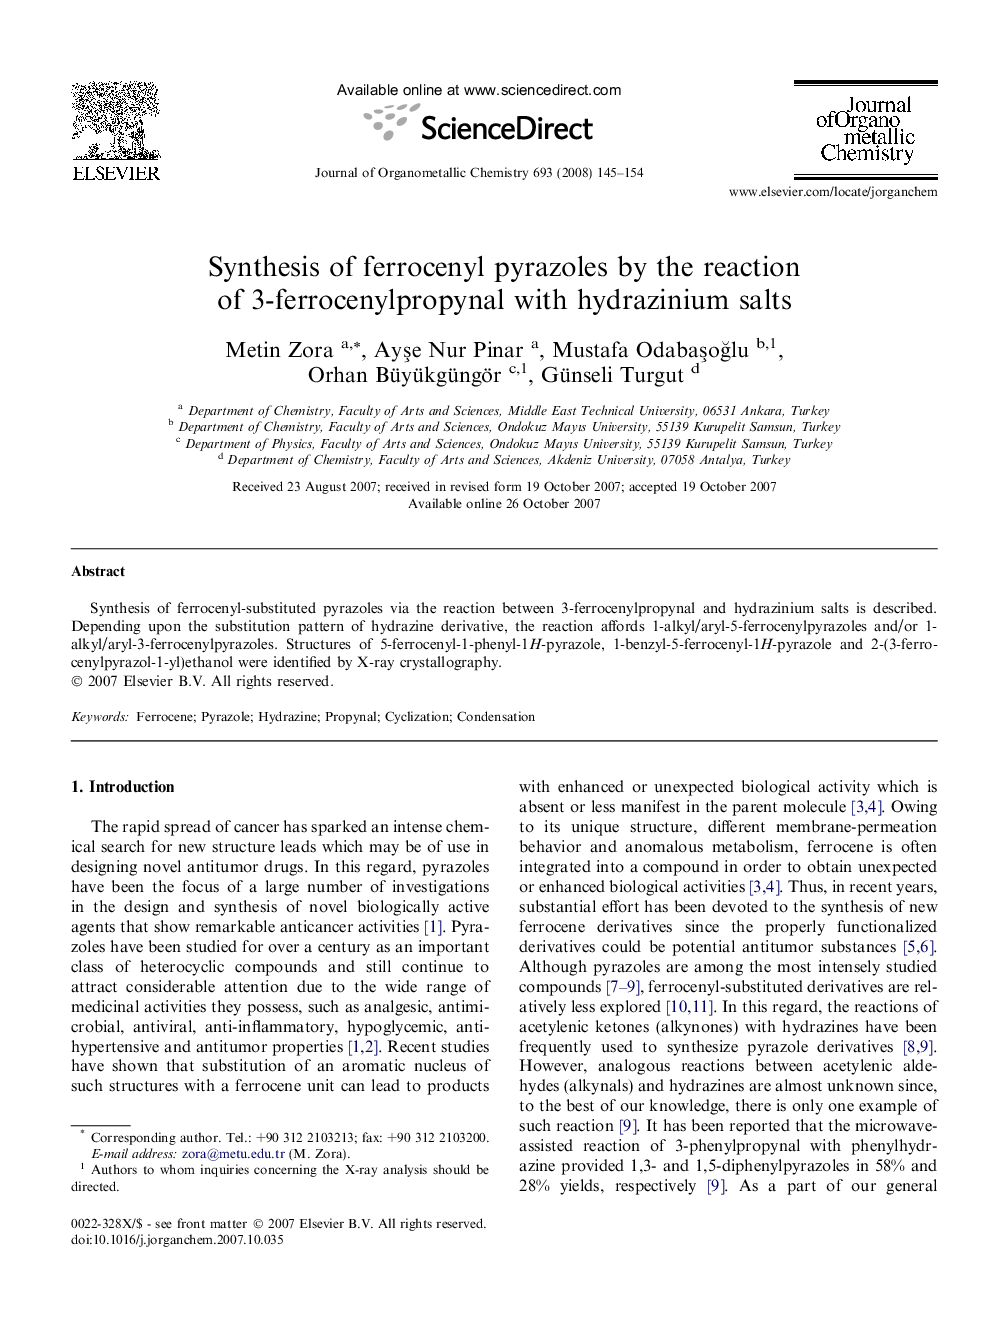 Synthesis of ferrocenyl pyrazoles by the reaction of 3-ferrocenylpropynal with hydrazinium salts